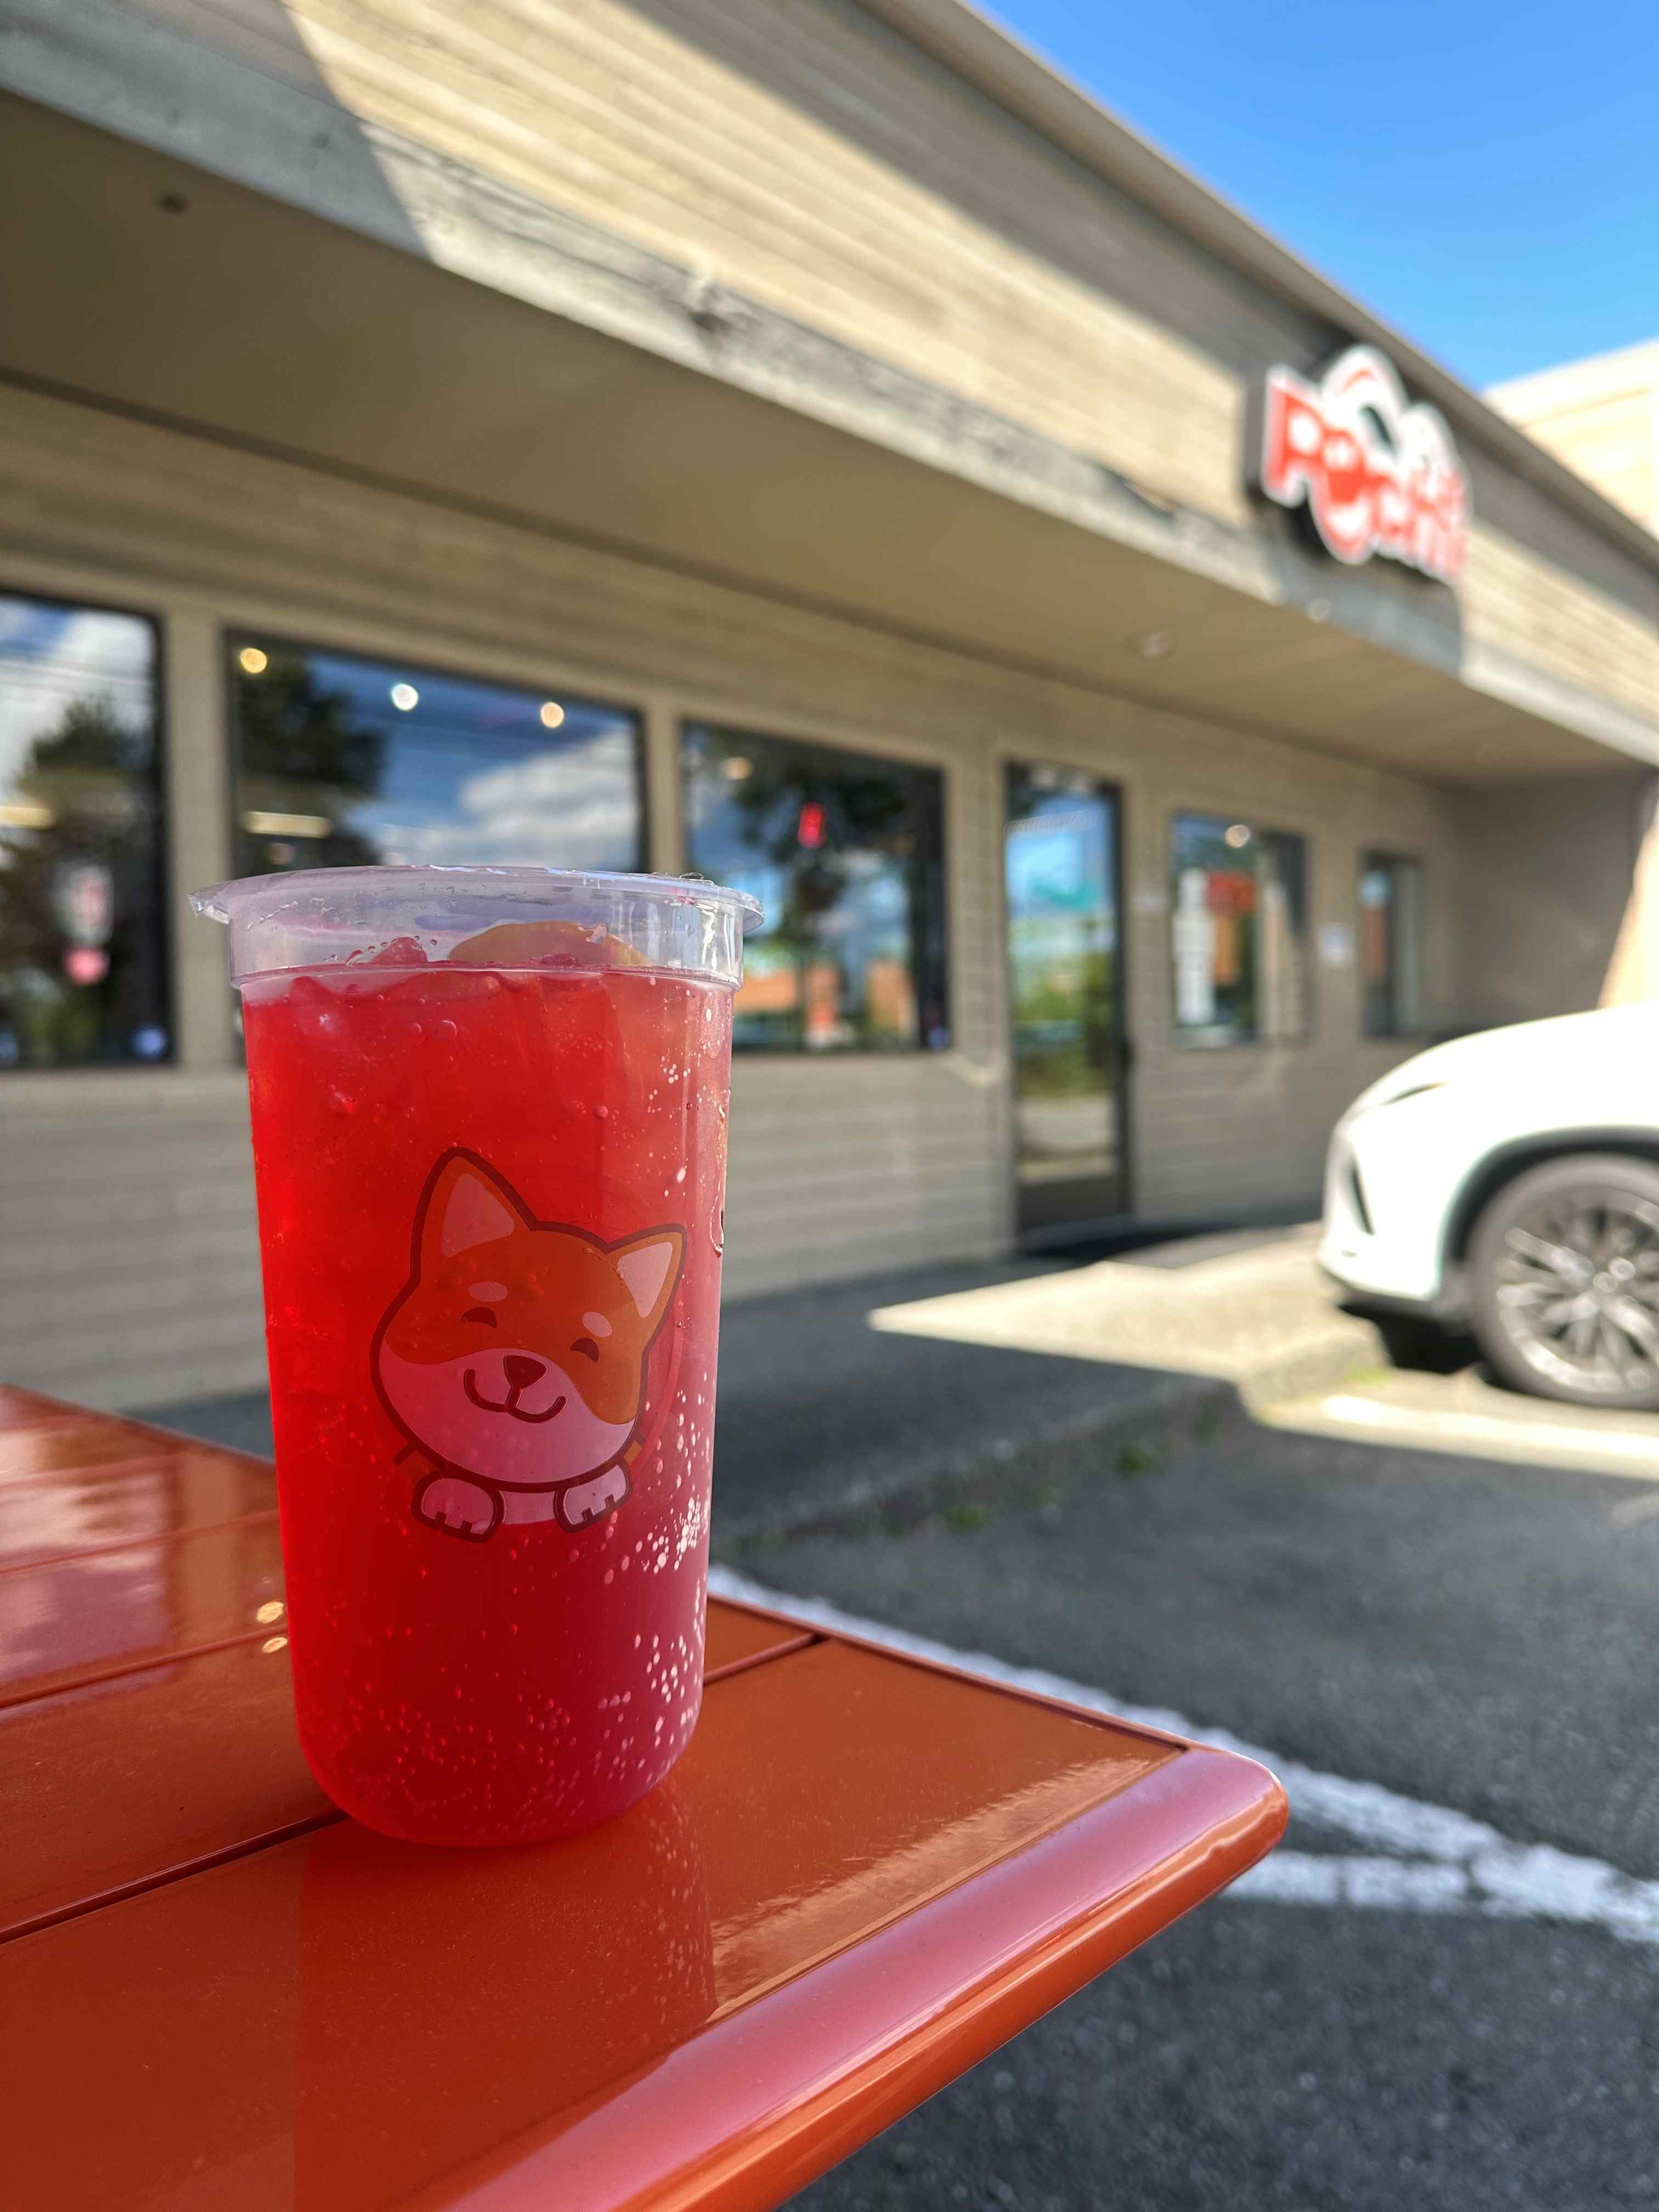 An iced tea beverage from Pochi in the foreground with the store and logo behind it